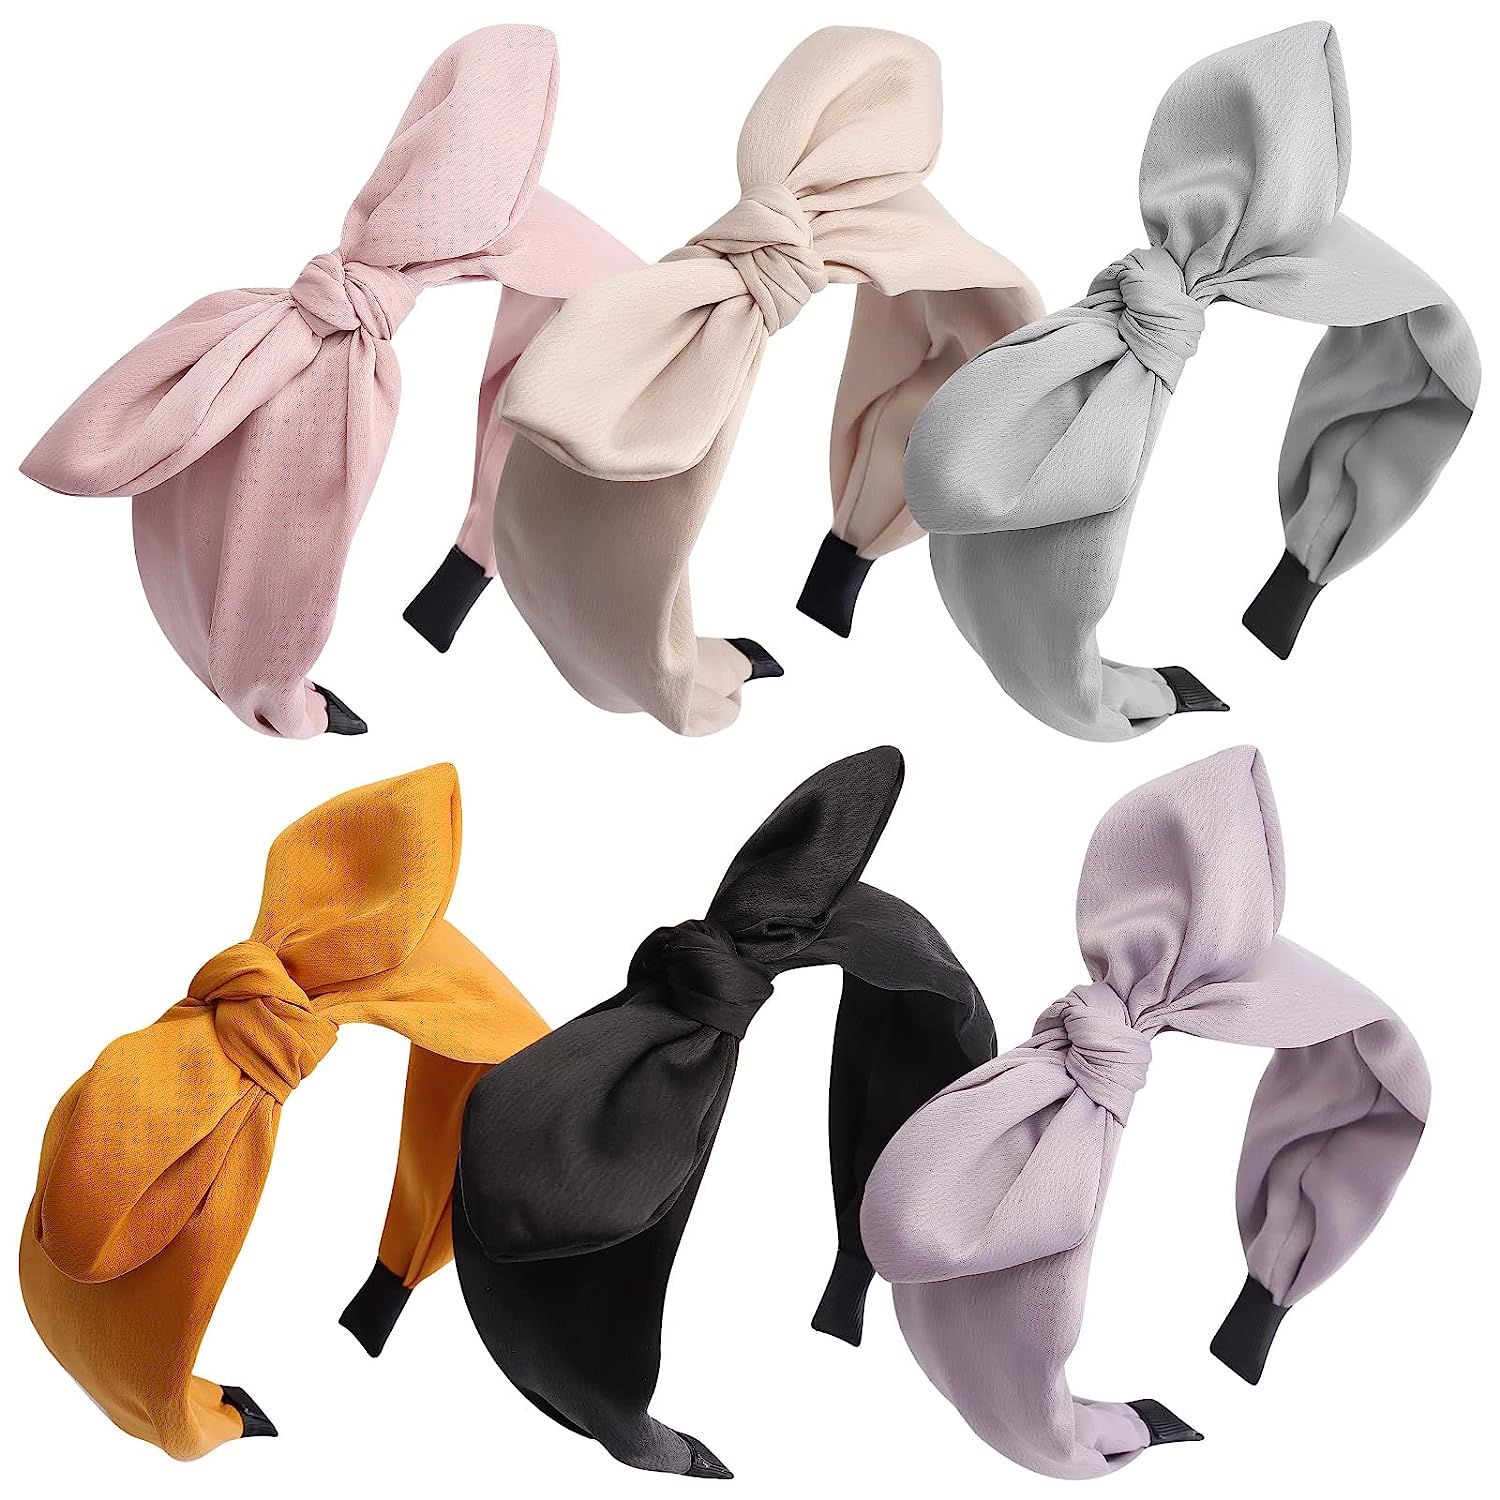 Knotted Bow Headbands for Women Fashion Wide Headband with Bow Bunny Ears 